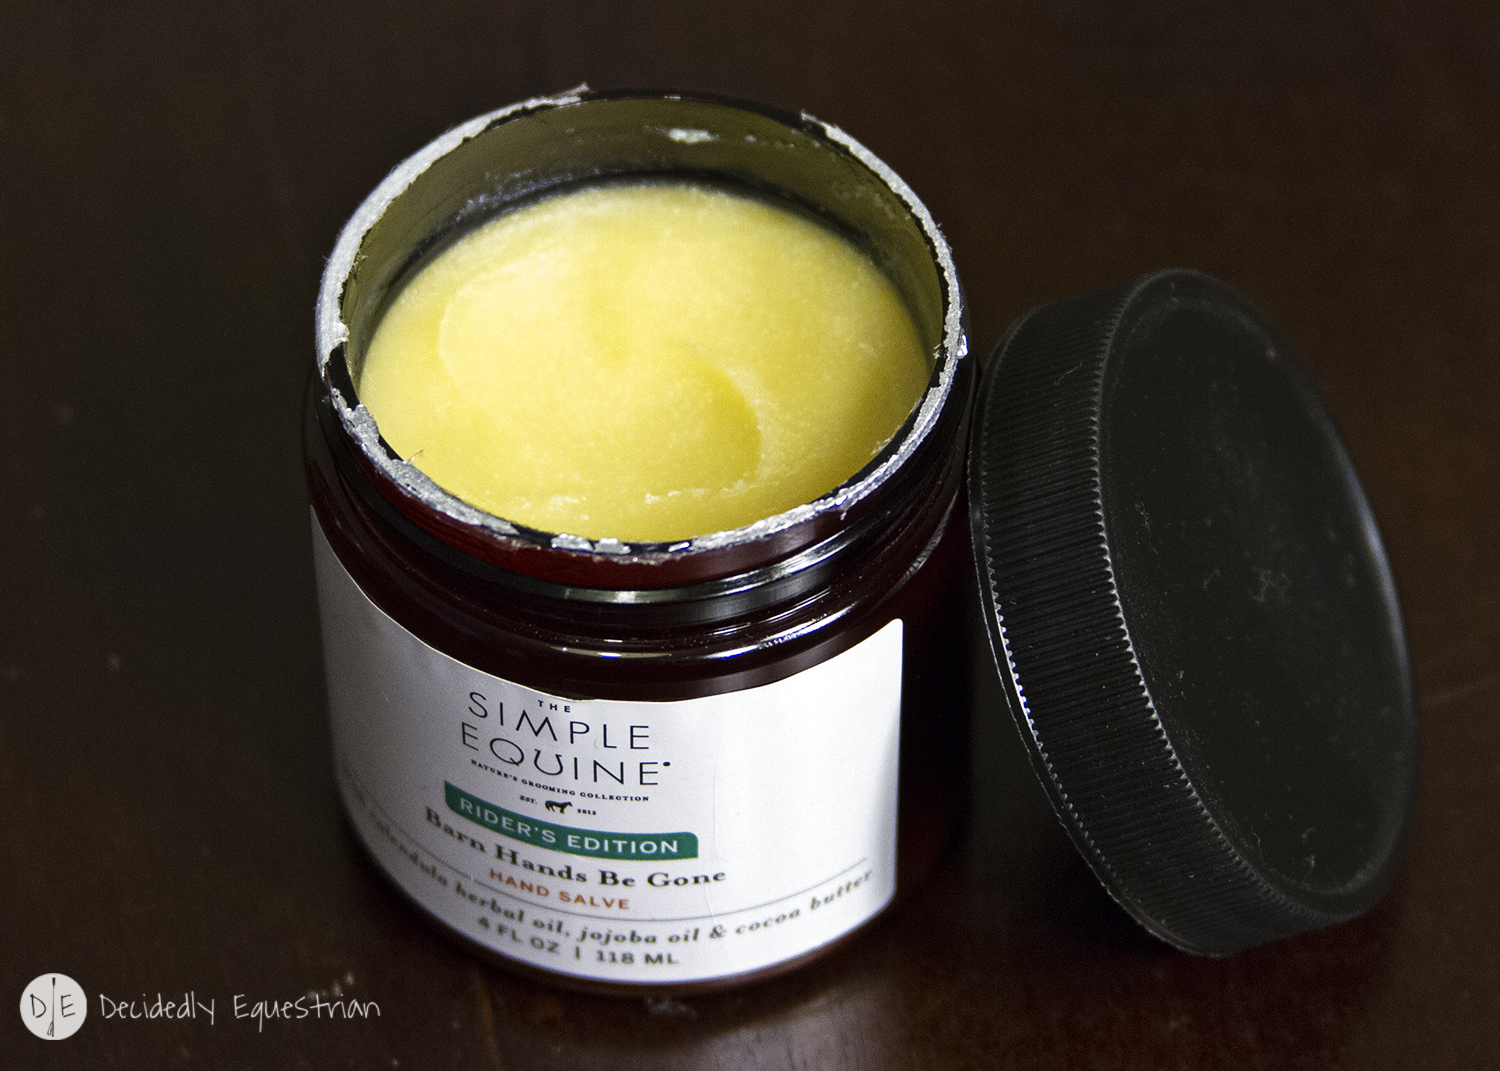 The Simple Equine Barn Hands Be Gone Review